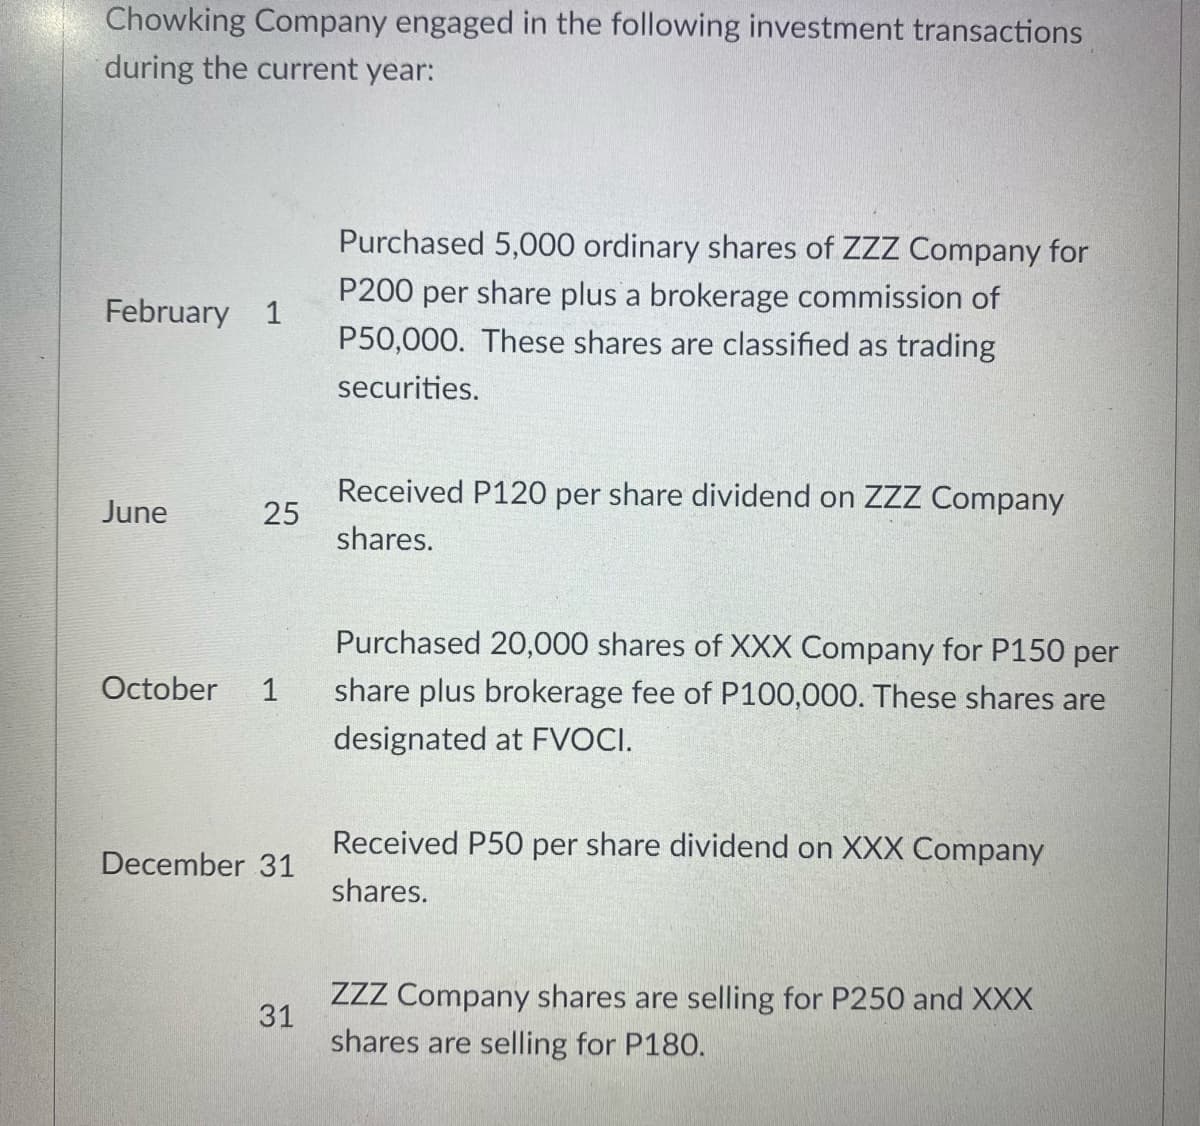 Chowking Company engaged in the following investment transactions
during the current year:
Purchased 5,000 ordinary shares of ZZZ Company for
P200 per share plus a brokerage commission of
P50,000. These shares are classified as trading
February 1
securities.
Received P120 per share dividend on ZZZ Company
25
shares.
June
Purchased 20,000 shares of XXX Company for P150 per
October
1
share plus brokerage fee of P100,000. These shares are
designated at FVOCI.
Received P50 per share dividend on XXX Company
December 31
shares.
ZZZ Company shares are selling for P250 and XXX
31
shares are selling for P180.
